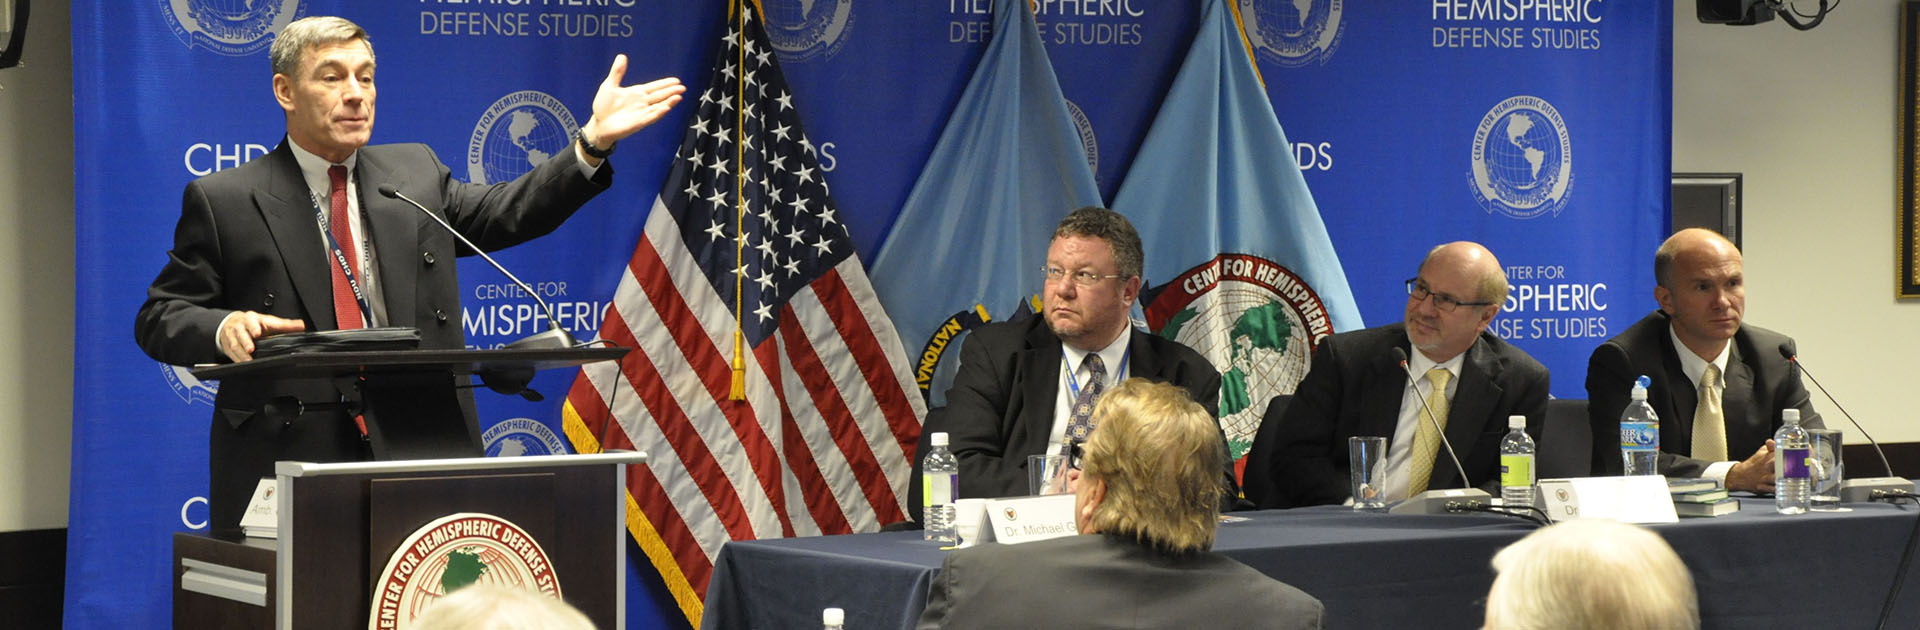 10th Annual National Security Symposium on Complex Security Issues in the Americas